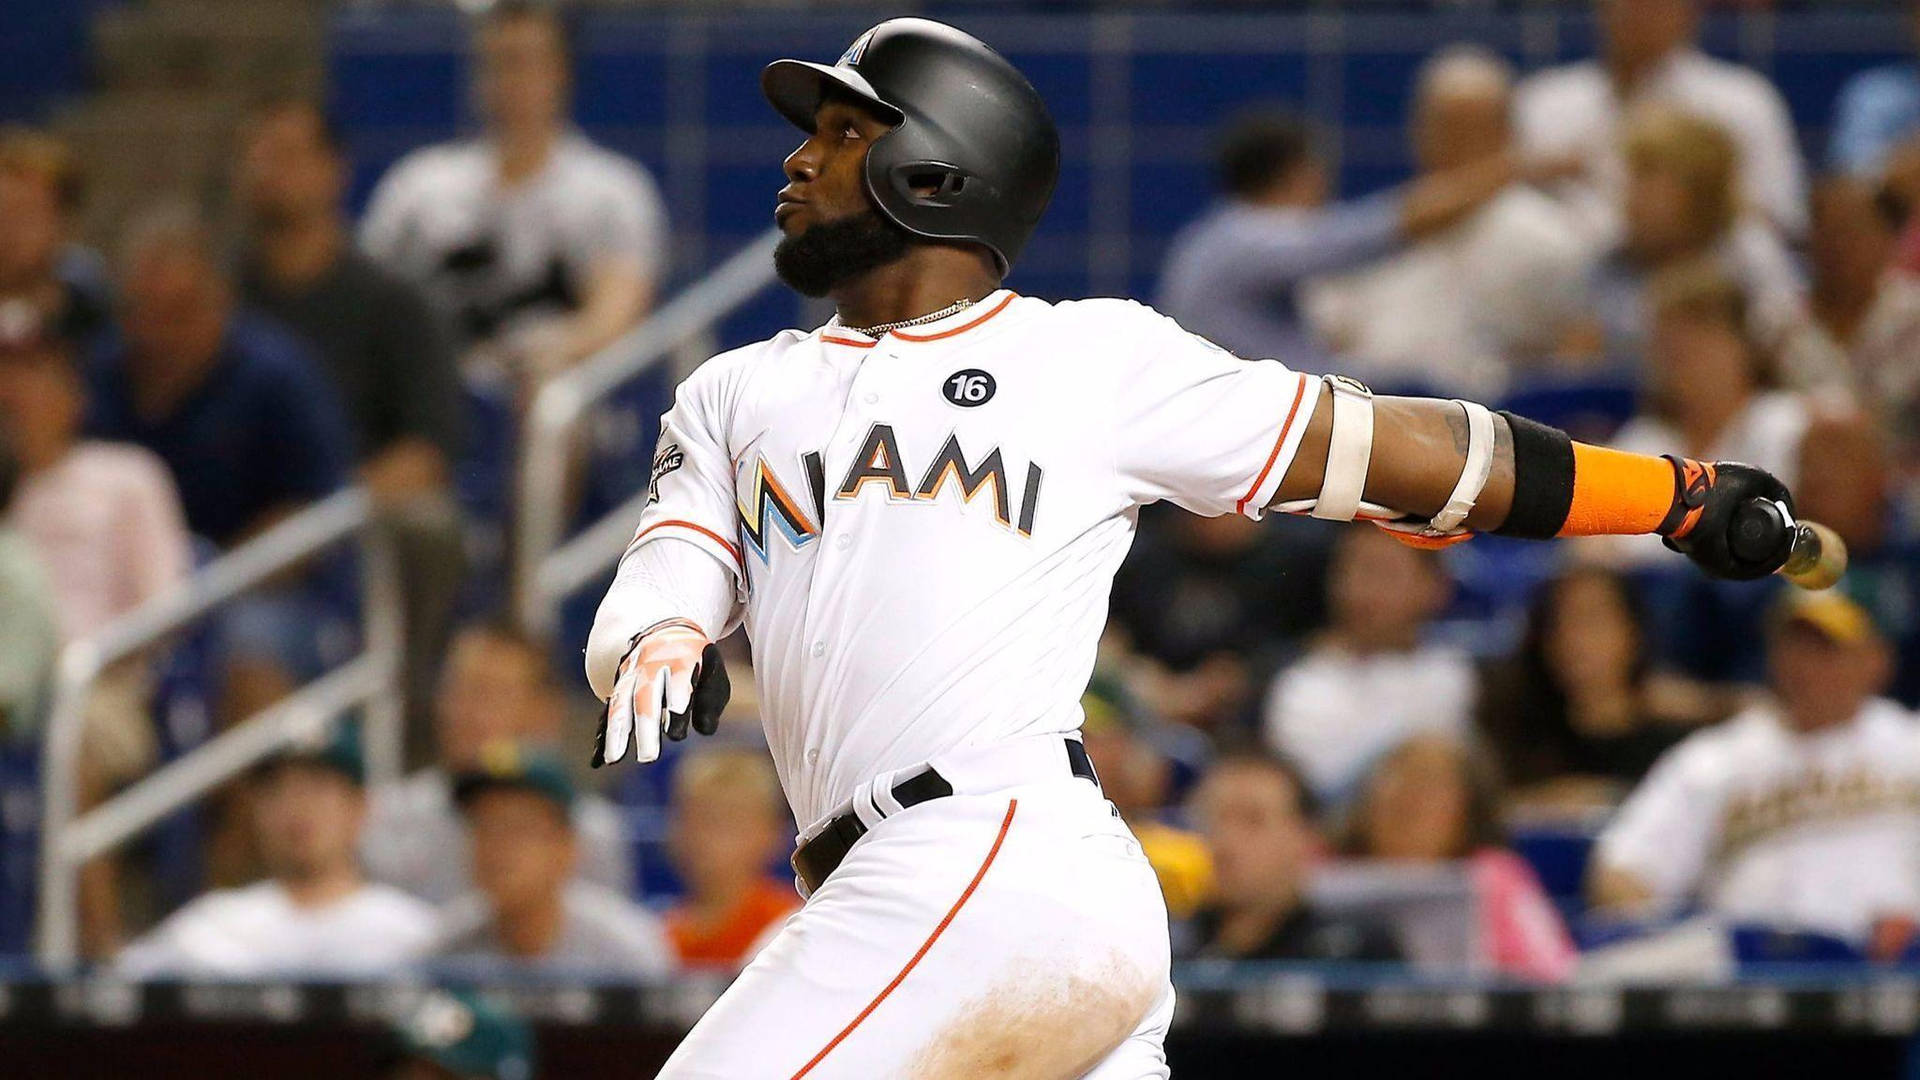 Download Marcell Ozuna After Hitting A Ball Wallpaper